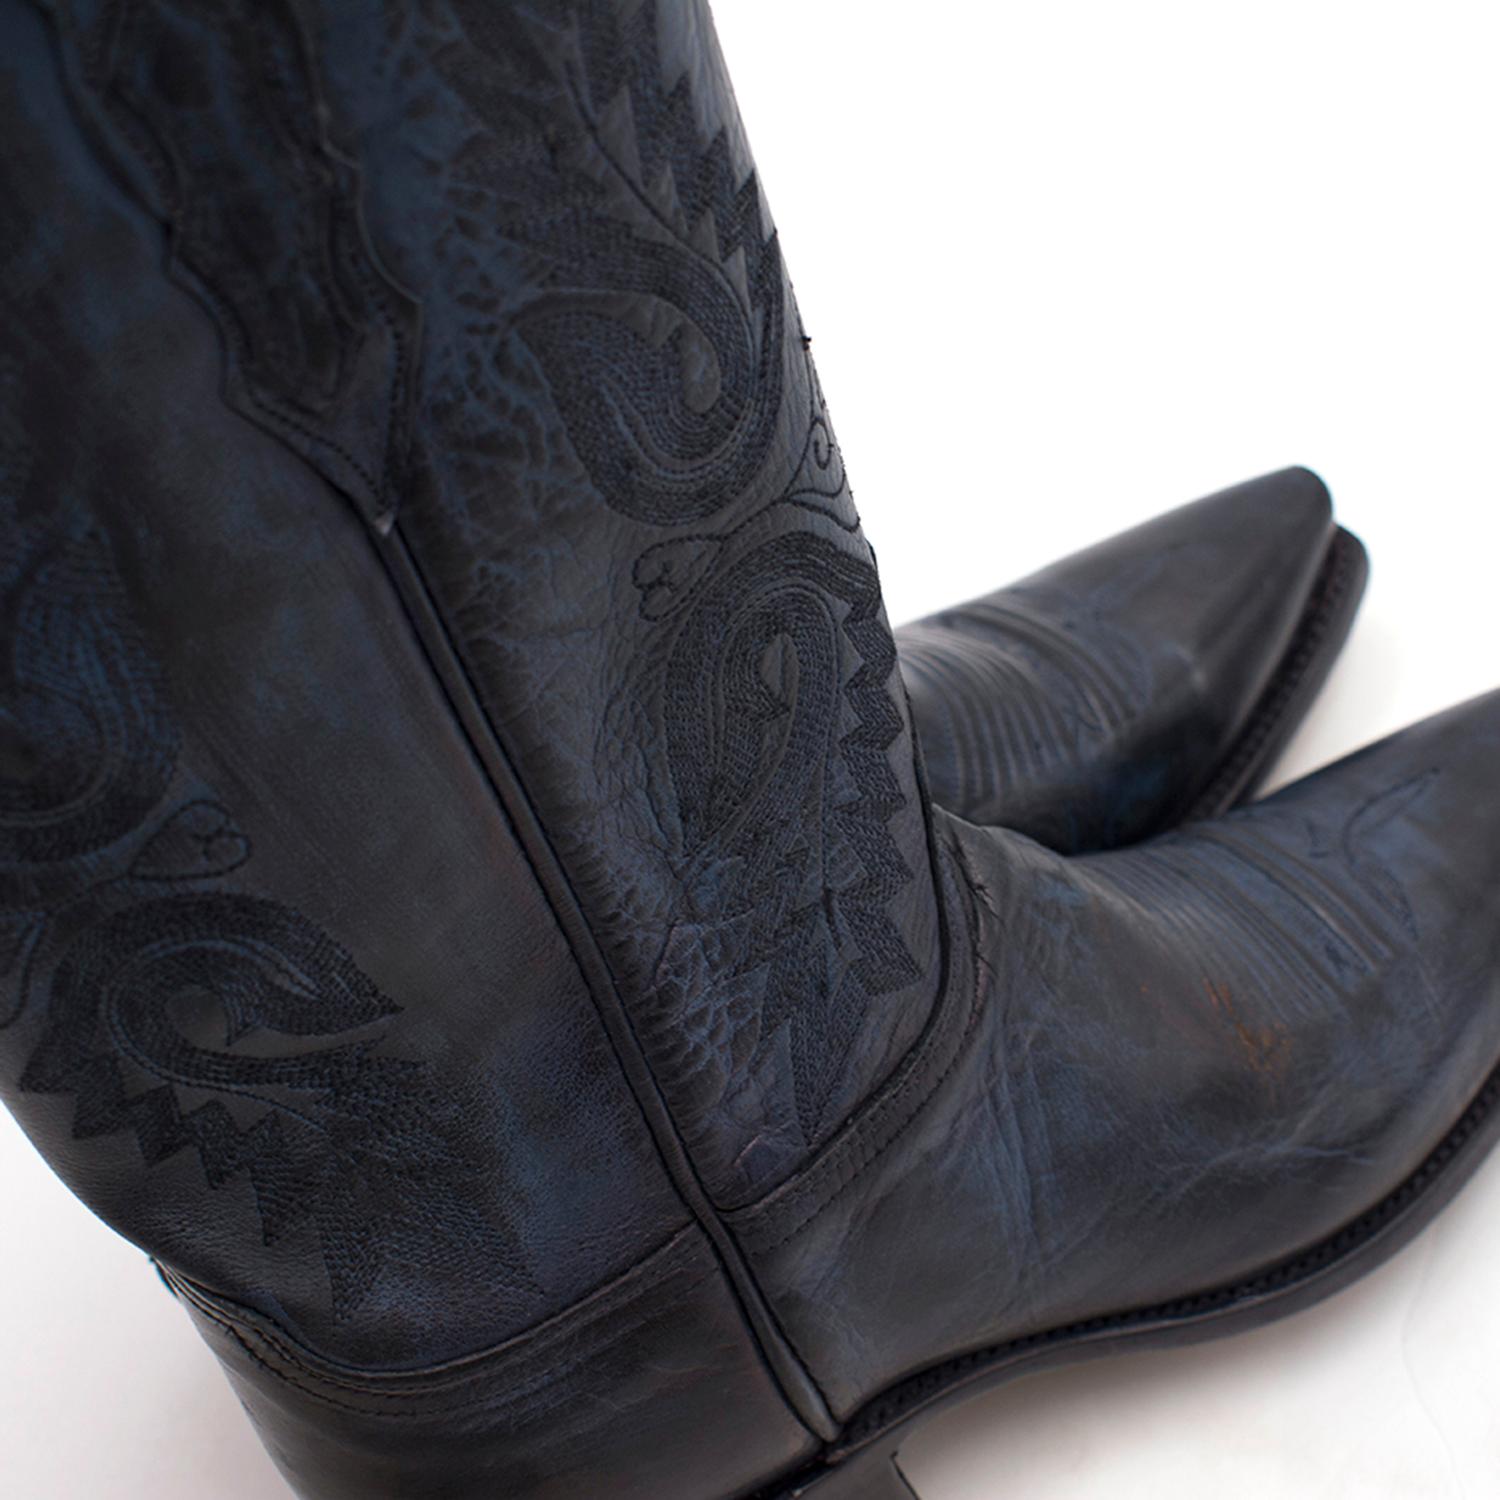 Women's Lucchese Bootmaker Pointed Blue Leather Western Boots US 8.5